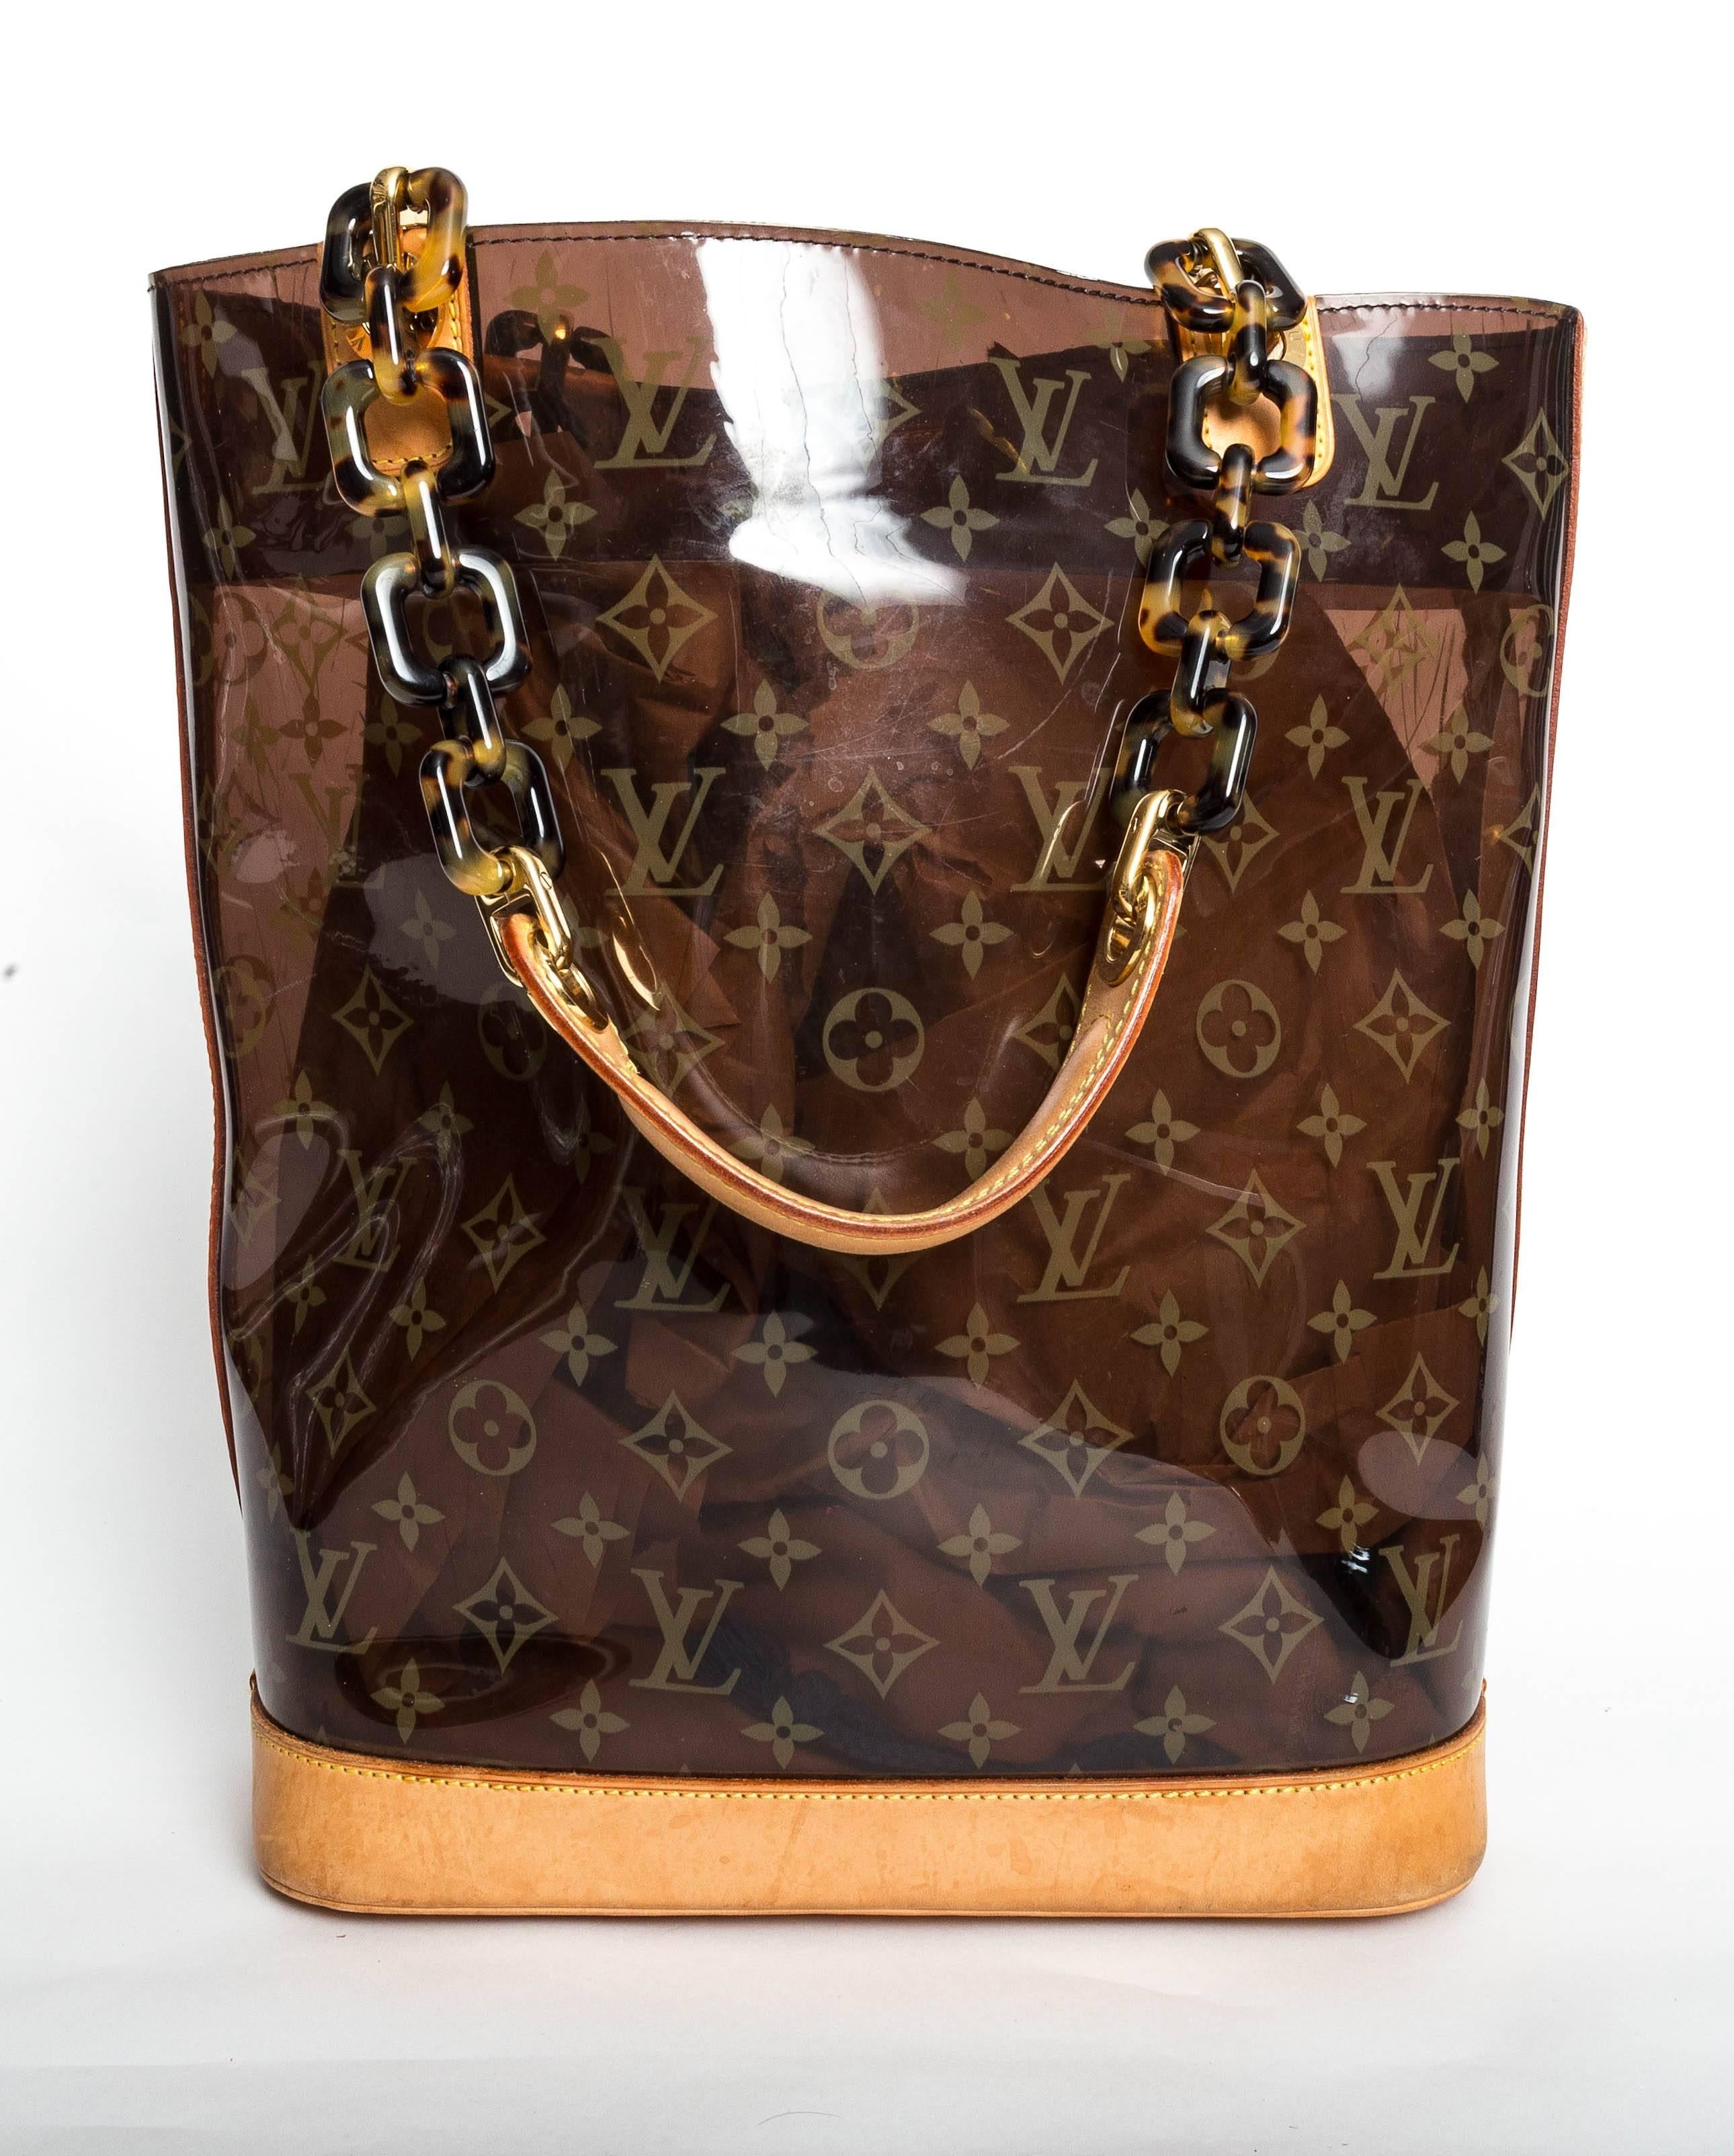 This chic tote is crafted of Louis Vuitton monogram on amber transparent vinyl. The bag features tortoise chain top handles with a vachetta leather grip, brass links, leather anchors, and a full vachetta leather base. The top is open to a spacious